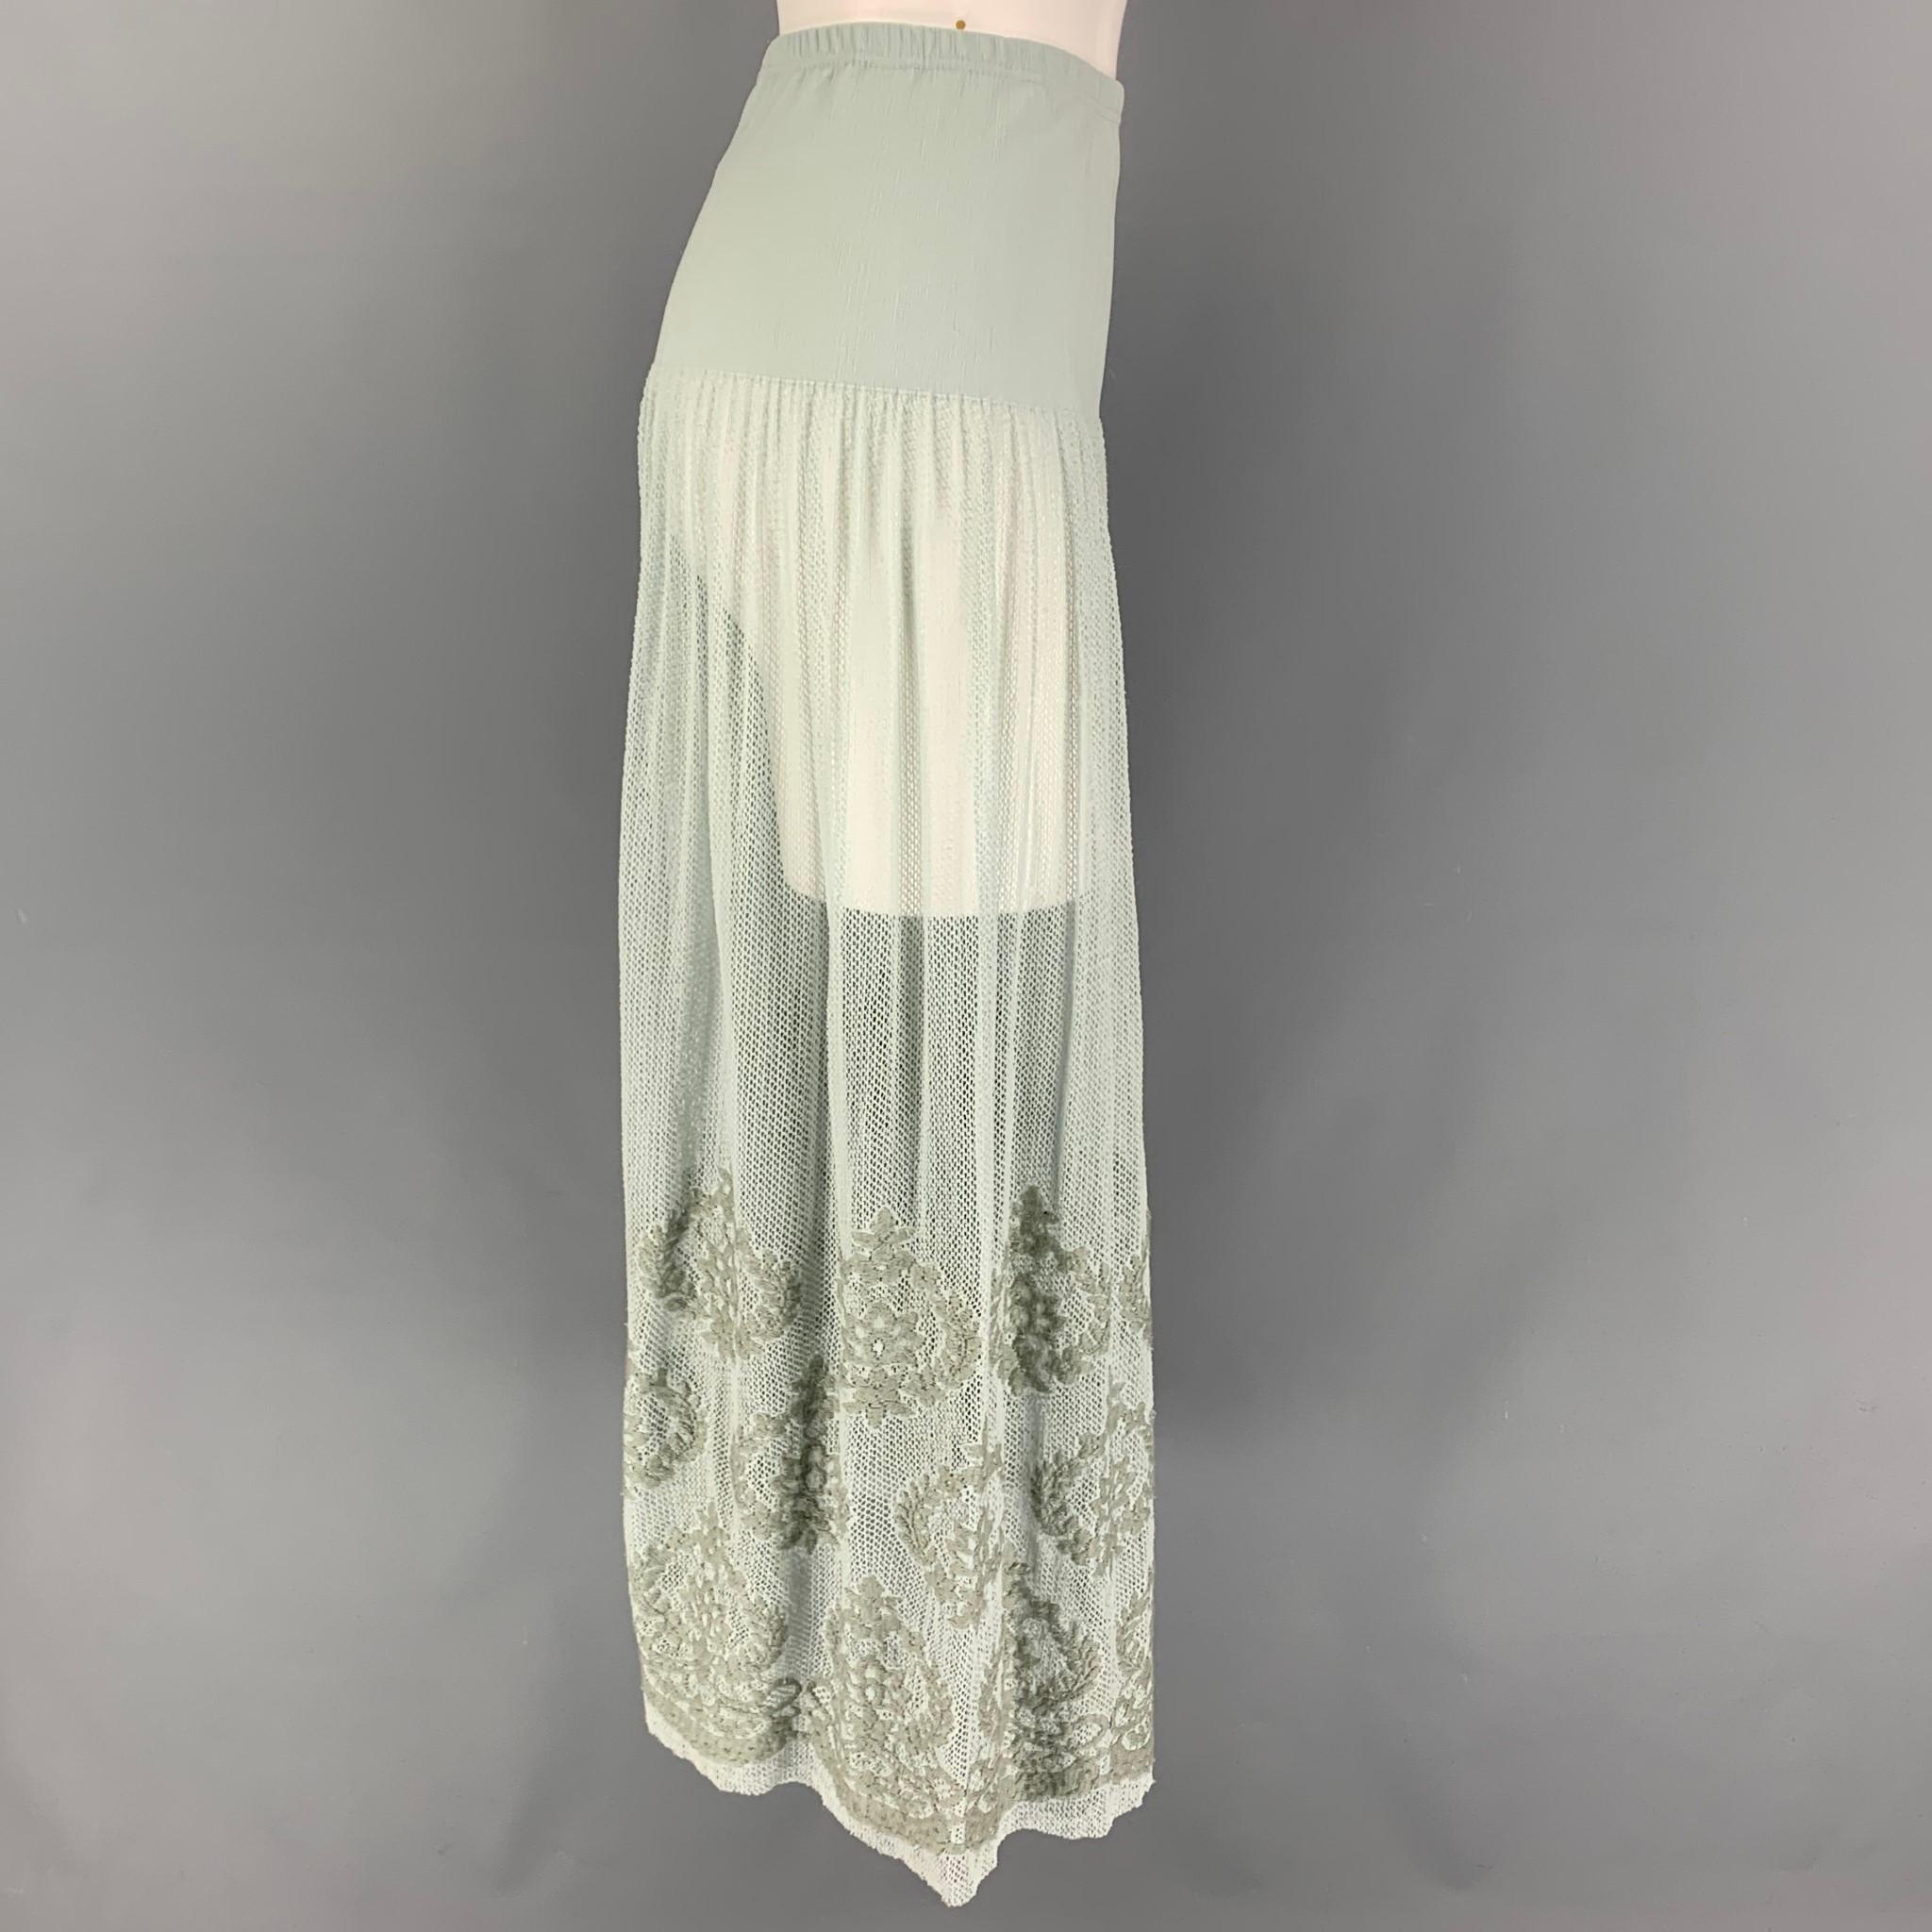 AGNES B. skirt comes in a sea foam polyamide blend featuring a mesh panel, embroidered design, and a elastic waist. Made in Japan. 

Very Good Pre-Owned Condition.
Marked: TU

Measurements:

Waist: 24 in.
Hip: 32 in.
Length: 35 in. 